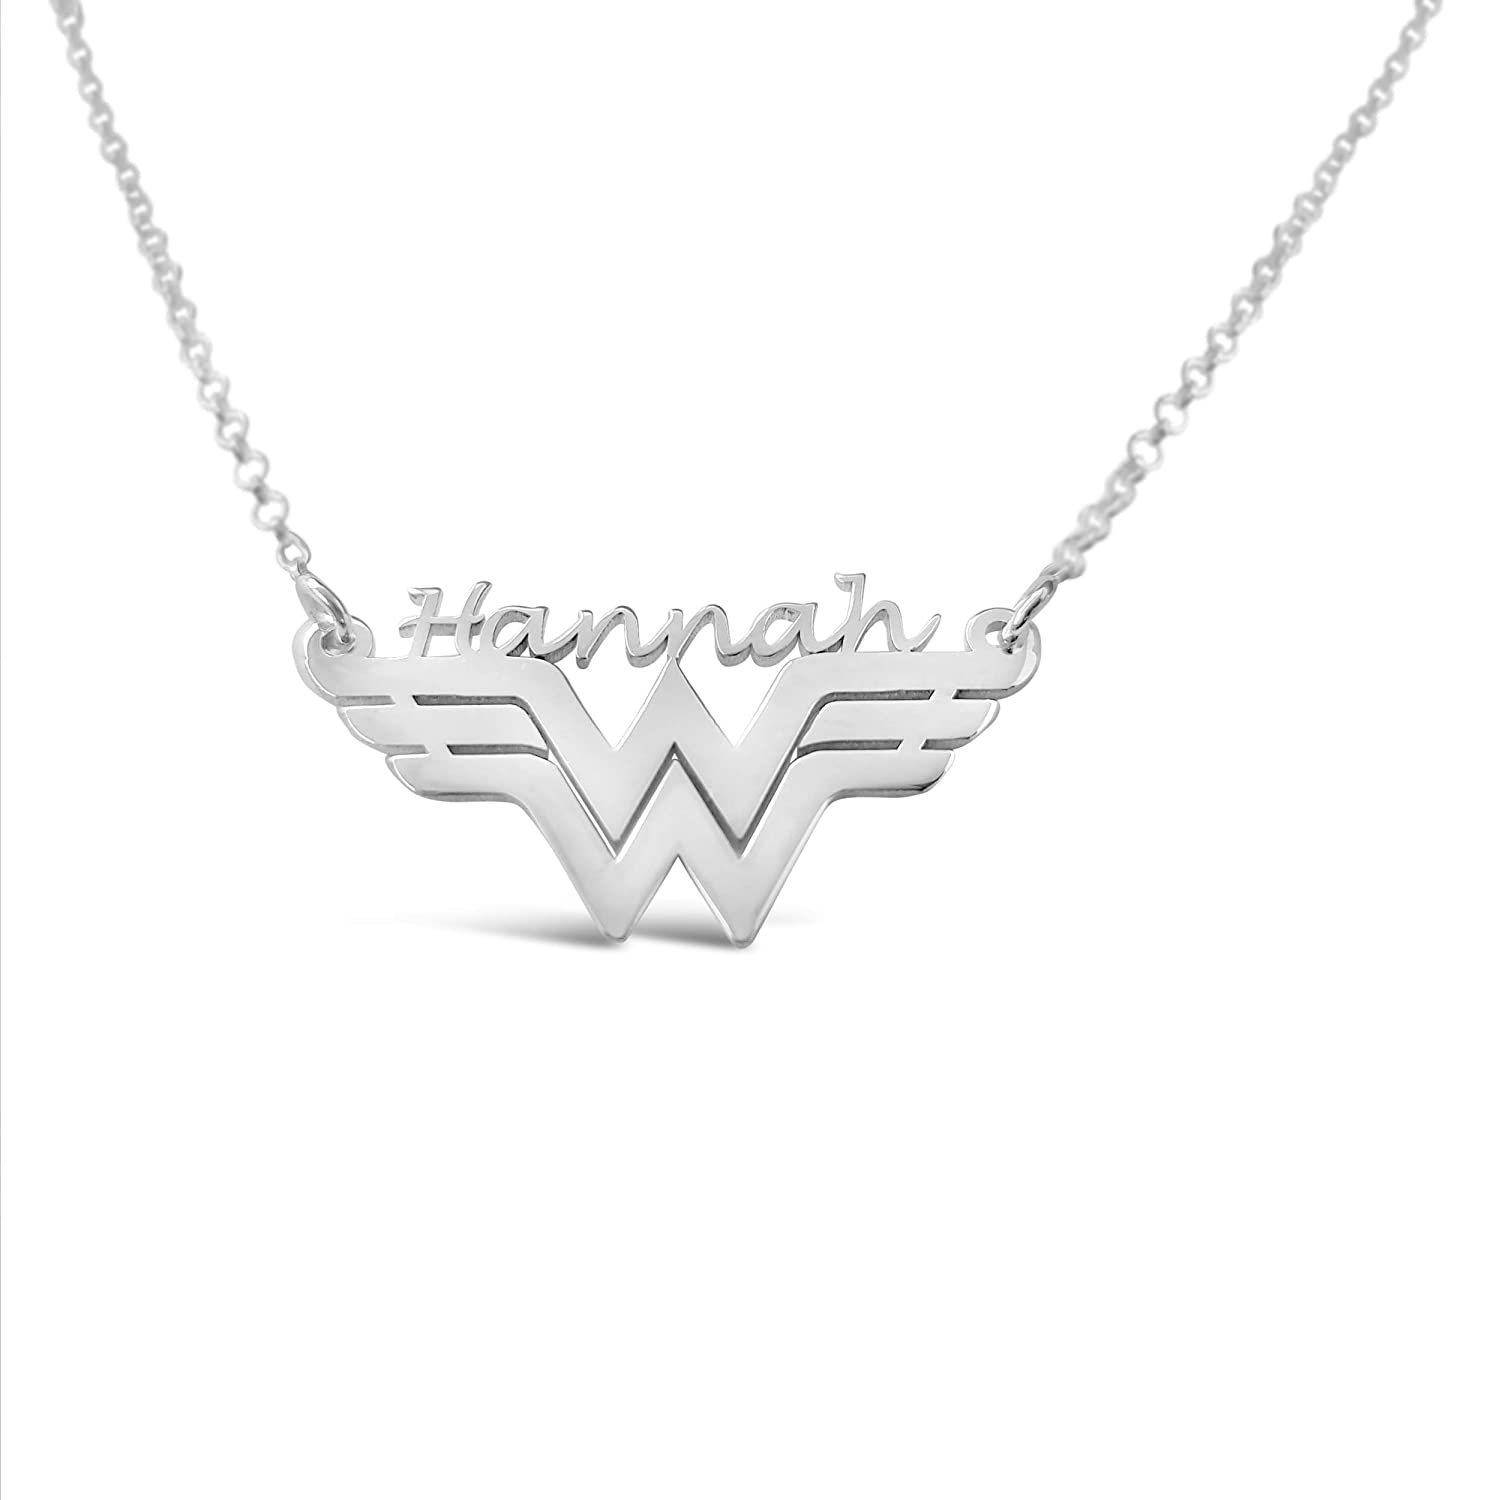 Wonder Woman Necklace, Personalized Name Necklace, Wonderwoman Charm, Wonder Woman Jewelry, Super Hero, Sterling Silver, Gold and Rose, Gifts for Mom, Mother, Girls